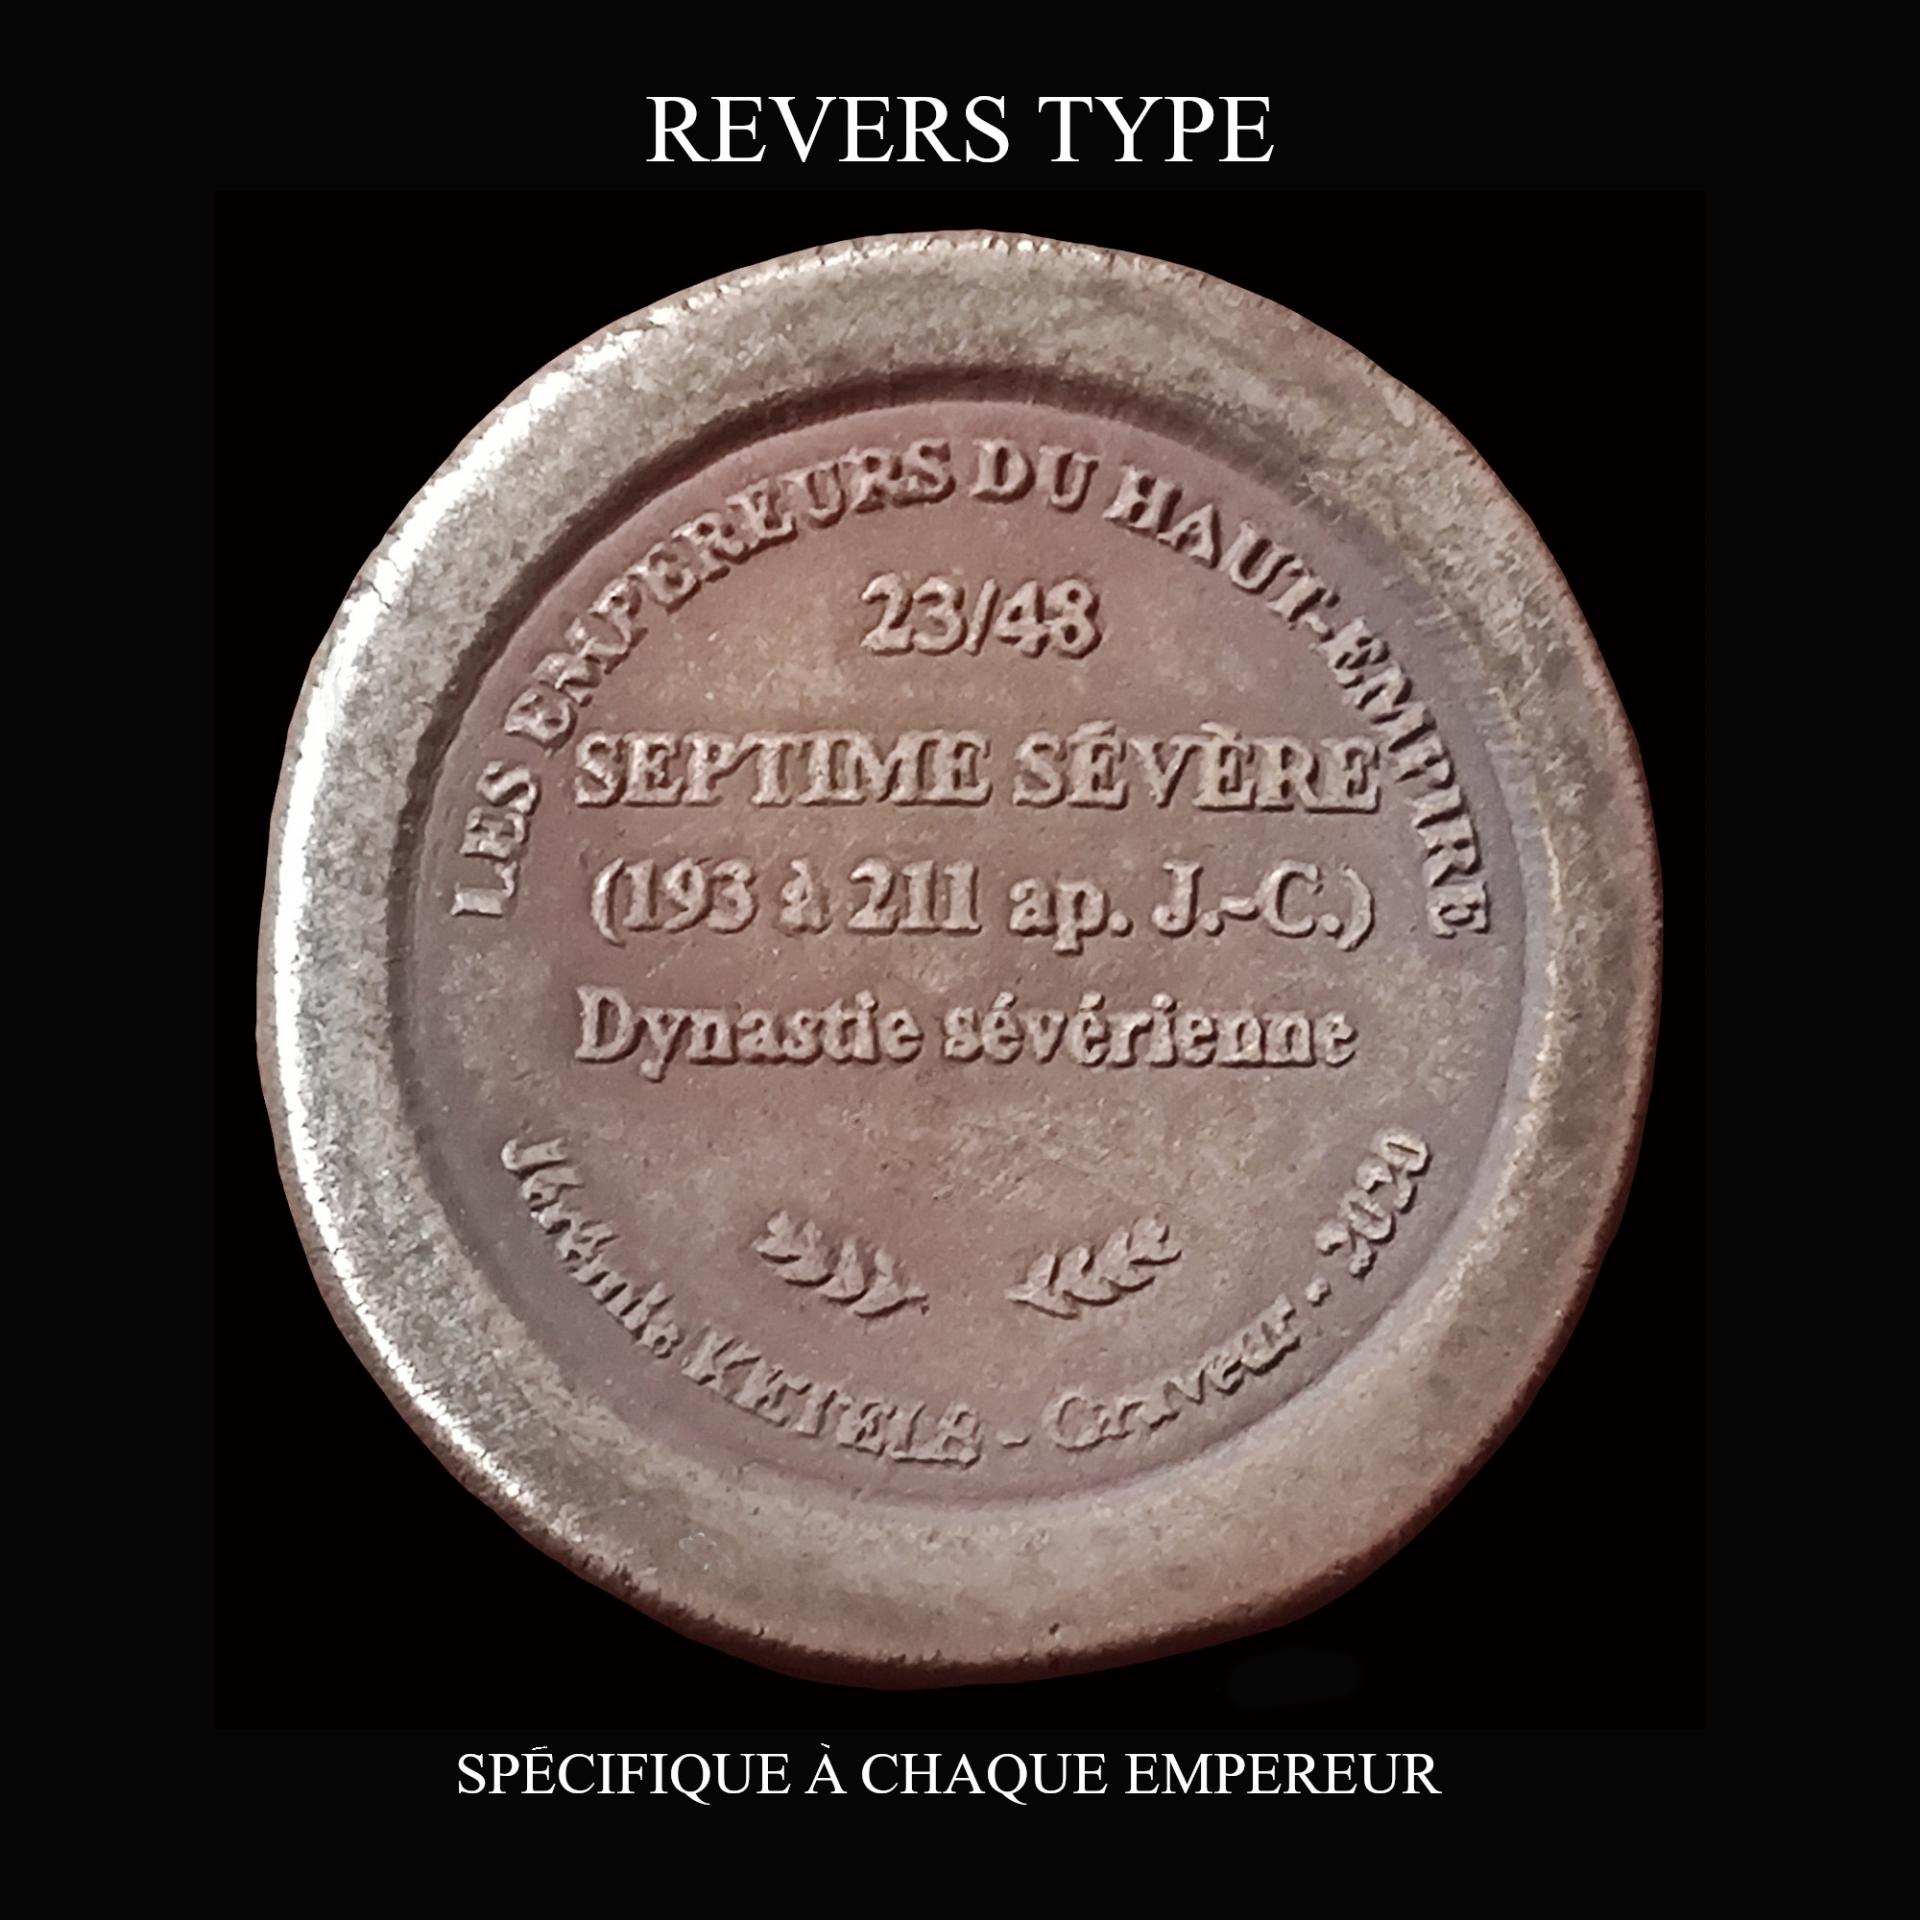 99 revers type septime 1